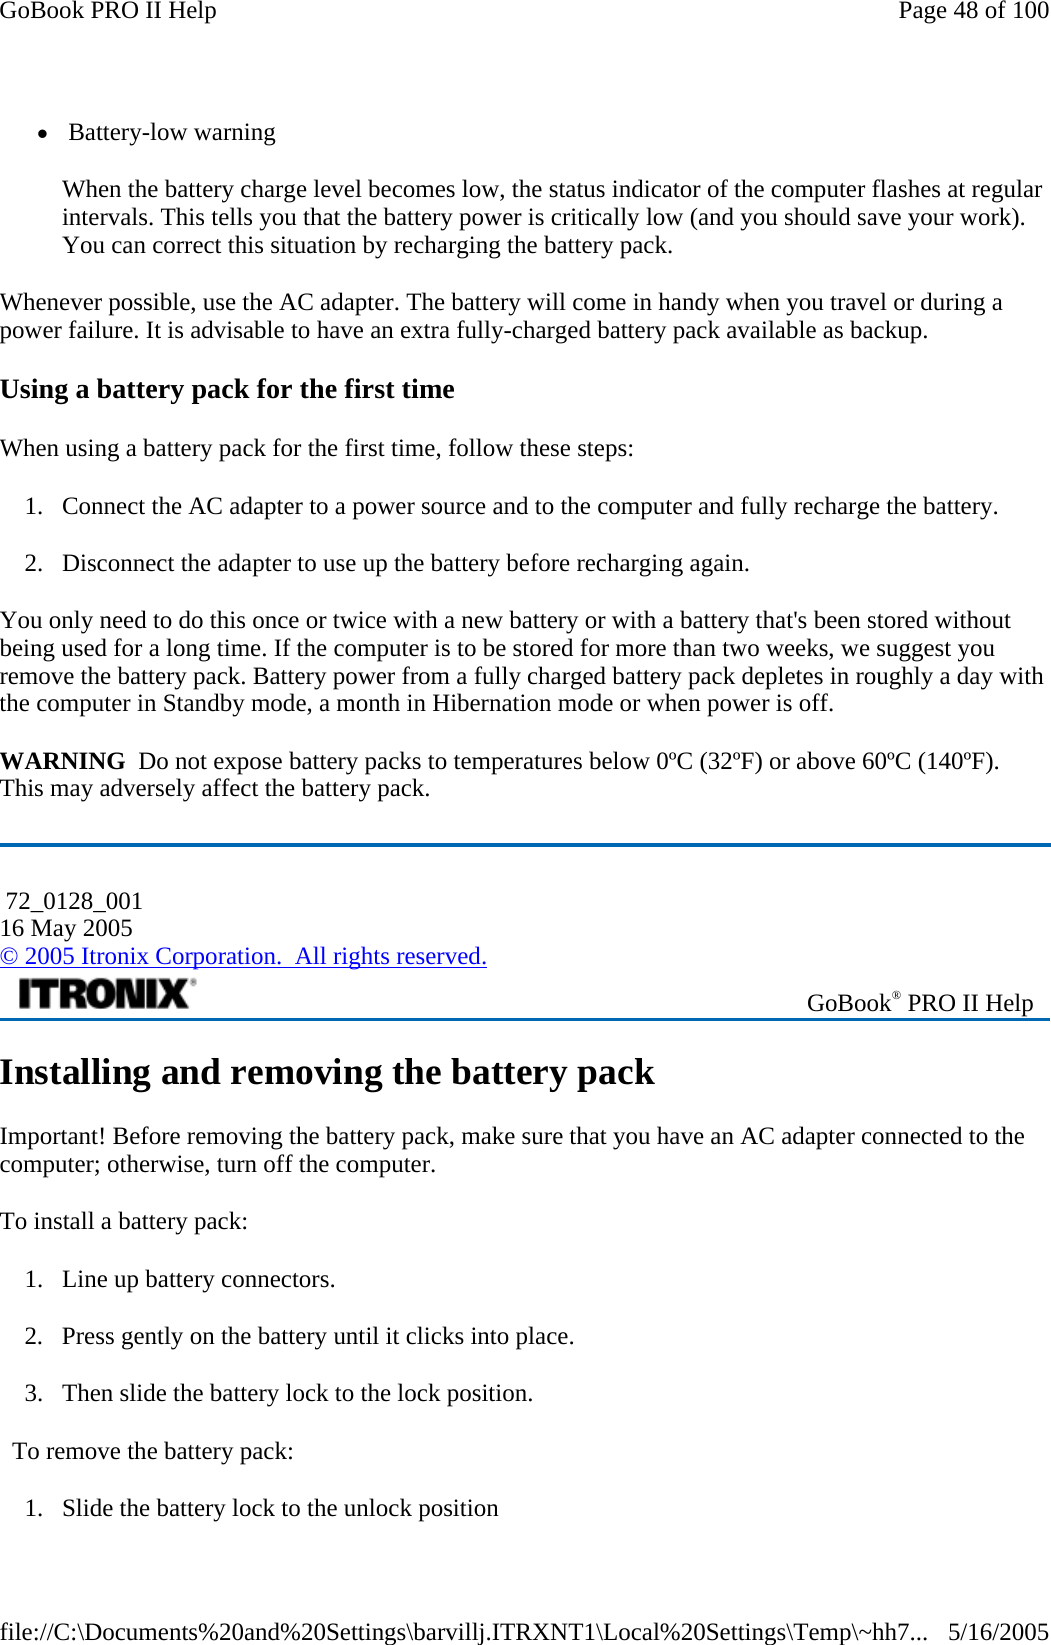 z Battery-low warning When the battery charge level becomes low, the status indicator of the computer flashes at regular intervals. This tells you that the battery power is critically low (and you should save your work). You can correct this situation by recharging the battery pack. Whenever possible, use the AC adapter. The battery will come in handy when you travel or during a power failure. It is advisable to have an extra fully-charged battery pack available as backup.  Using a battery pack for the first time When using a battery pack for the first time, follow these steps:  1. Connect the AC adapter to a power source and to the computer and fully recharge the battery. 2. Disconnect the adapter to use up the battery before recharging again.  You only need to do this once or twice with a new battery or with a battery that&apos;s been stored without being used for a long time. If the computer is to be stored for more than two weeks, we suggest you remove the battery pack. Battery power from a fully charged battery pack depletes in roughly a day with the computer in Standby mode, a month in Hibernation mode or when power is off. WARNING  Do not expose battery packs to temperatures below 0ºC (32ºF) or above 60ºC (140ºF). This may adversely affect the battery pack. Installing and removing the battery pack Important! Before removing the battery pack, make sure that you have an AC adapter connected to the computer; otherwise, turn off the computer. To install a battery pack: 1. Line up battery connectors. 2. Press gently on the battery until it clicks into place.  3. Then slide the battery lock to the lock position.   To remove the battery pack: 1. Slide the battery lock to the unlock position  72_0128_001 16 May 2005 © 2005 Itronix Corporation.  All rights reserved. GoBook® PRO II Help Page 48 of 100GoBook PRO II Help5/16/2005file://C:\Documents%20and%20Settings\barvillj.ITRXNT1\Local%20Settings\Temp\~hh7...